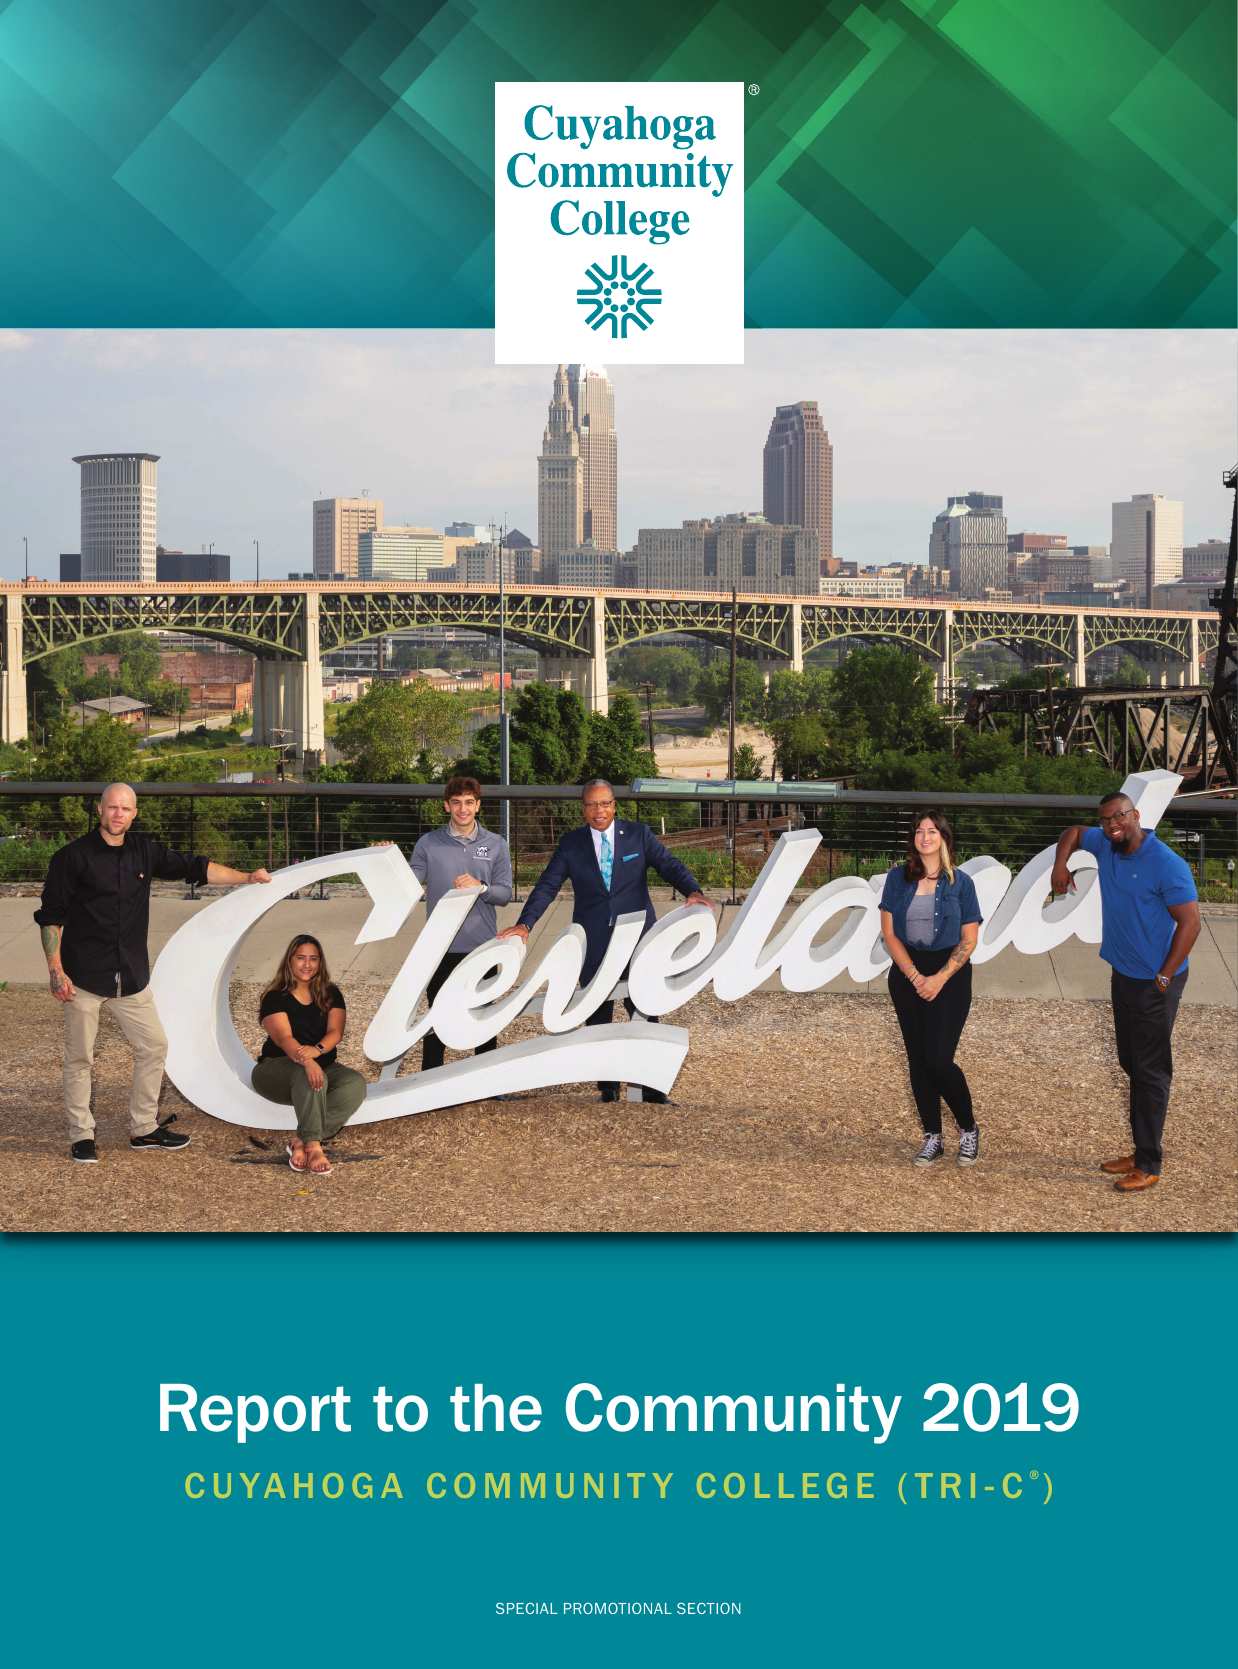 Read the 2019 Report to the Community